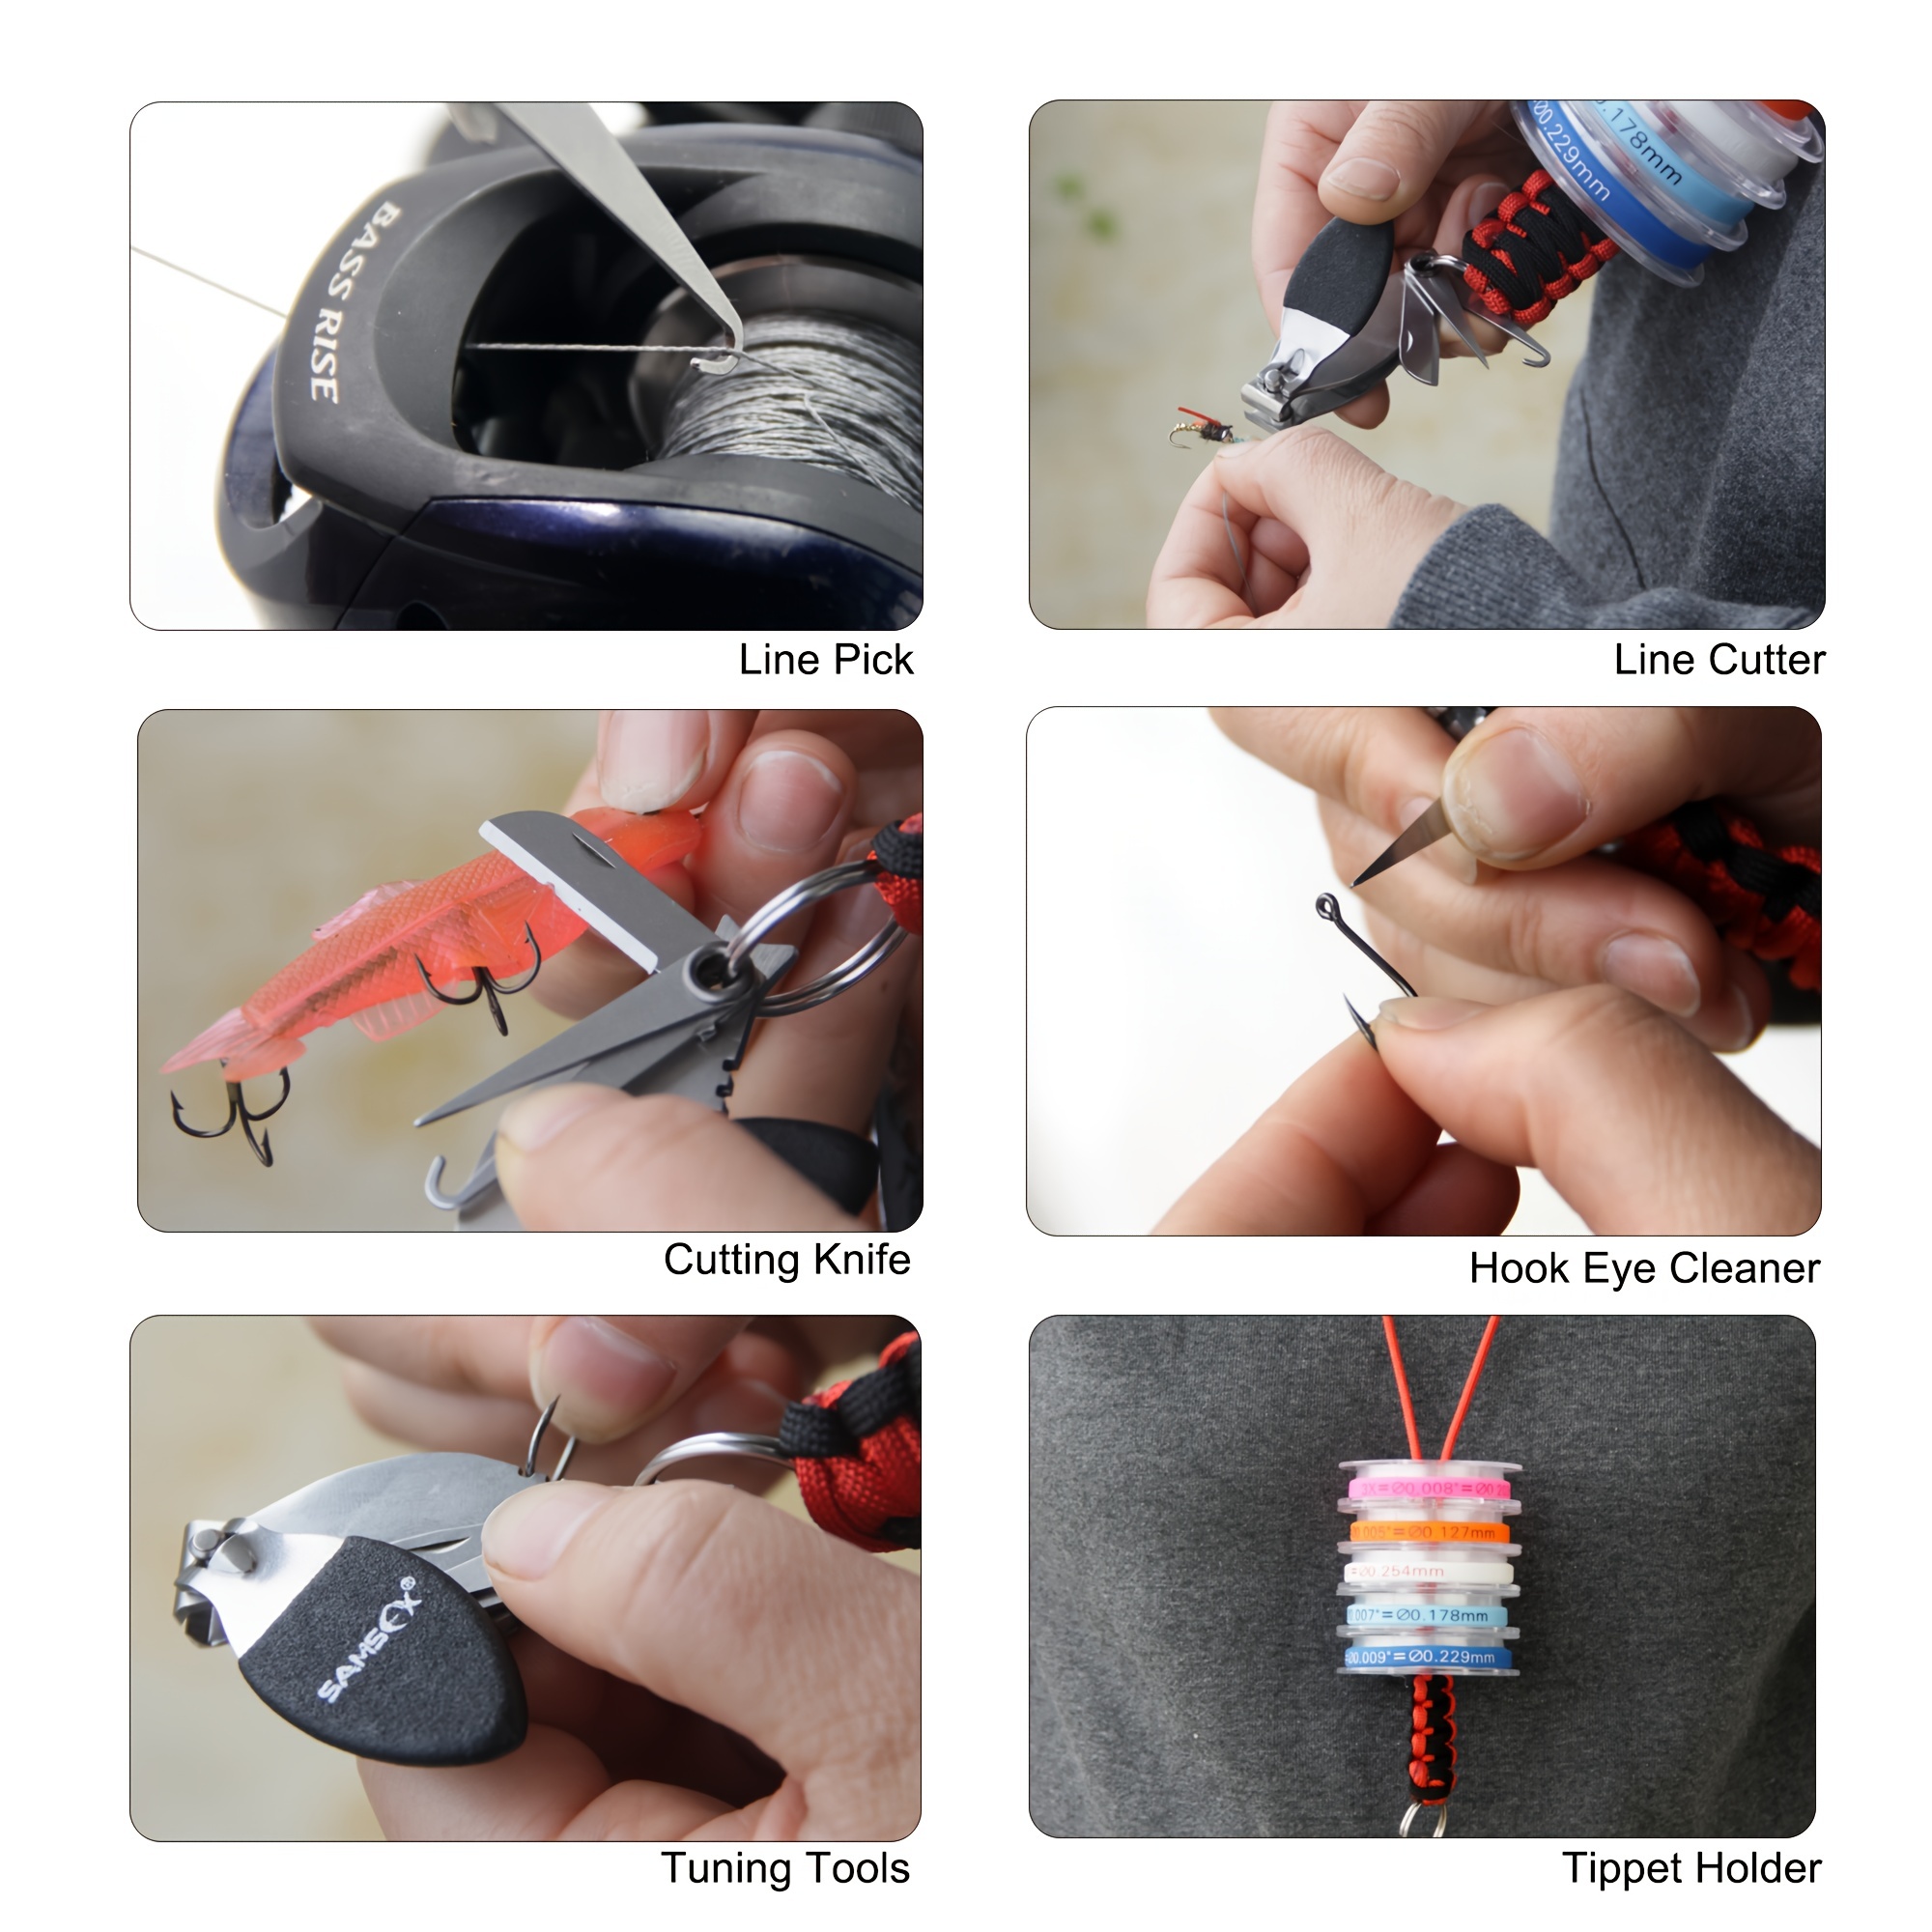 * Fly Fishing Clipper With Fishing Lanyard - Stainless Steel,  Multifunctional, 7 Functions, Wire Or Leader Cutter And Scissors